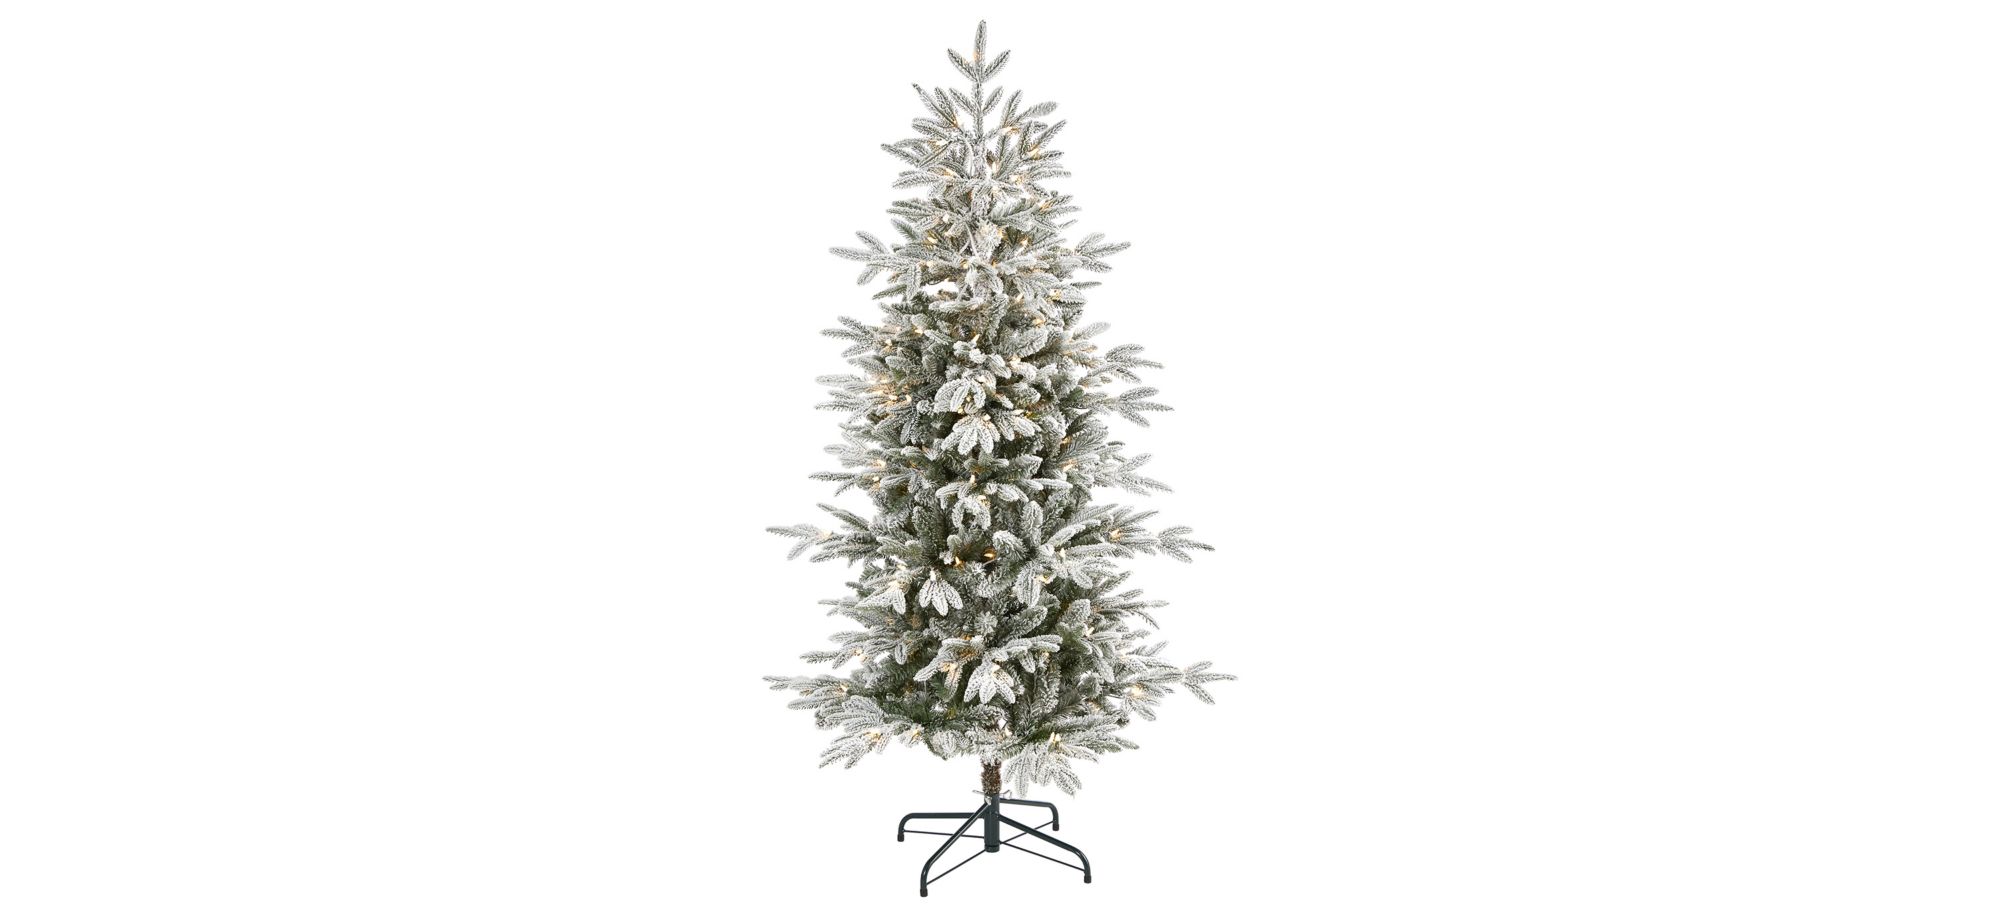 5.5ft. Pre-Lit Flocked Manchester Spruce Artificial Christmas Tree in Green by Bellanest